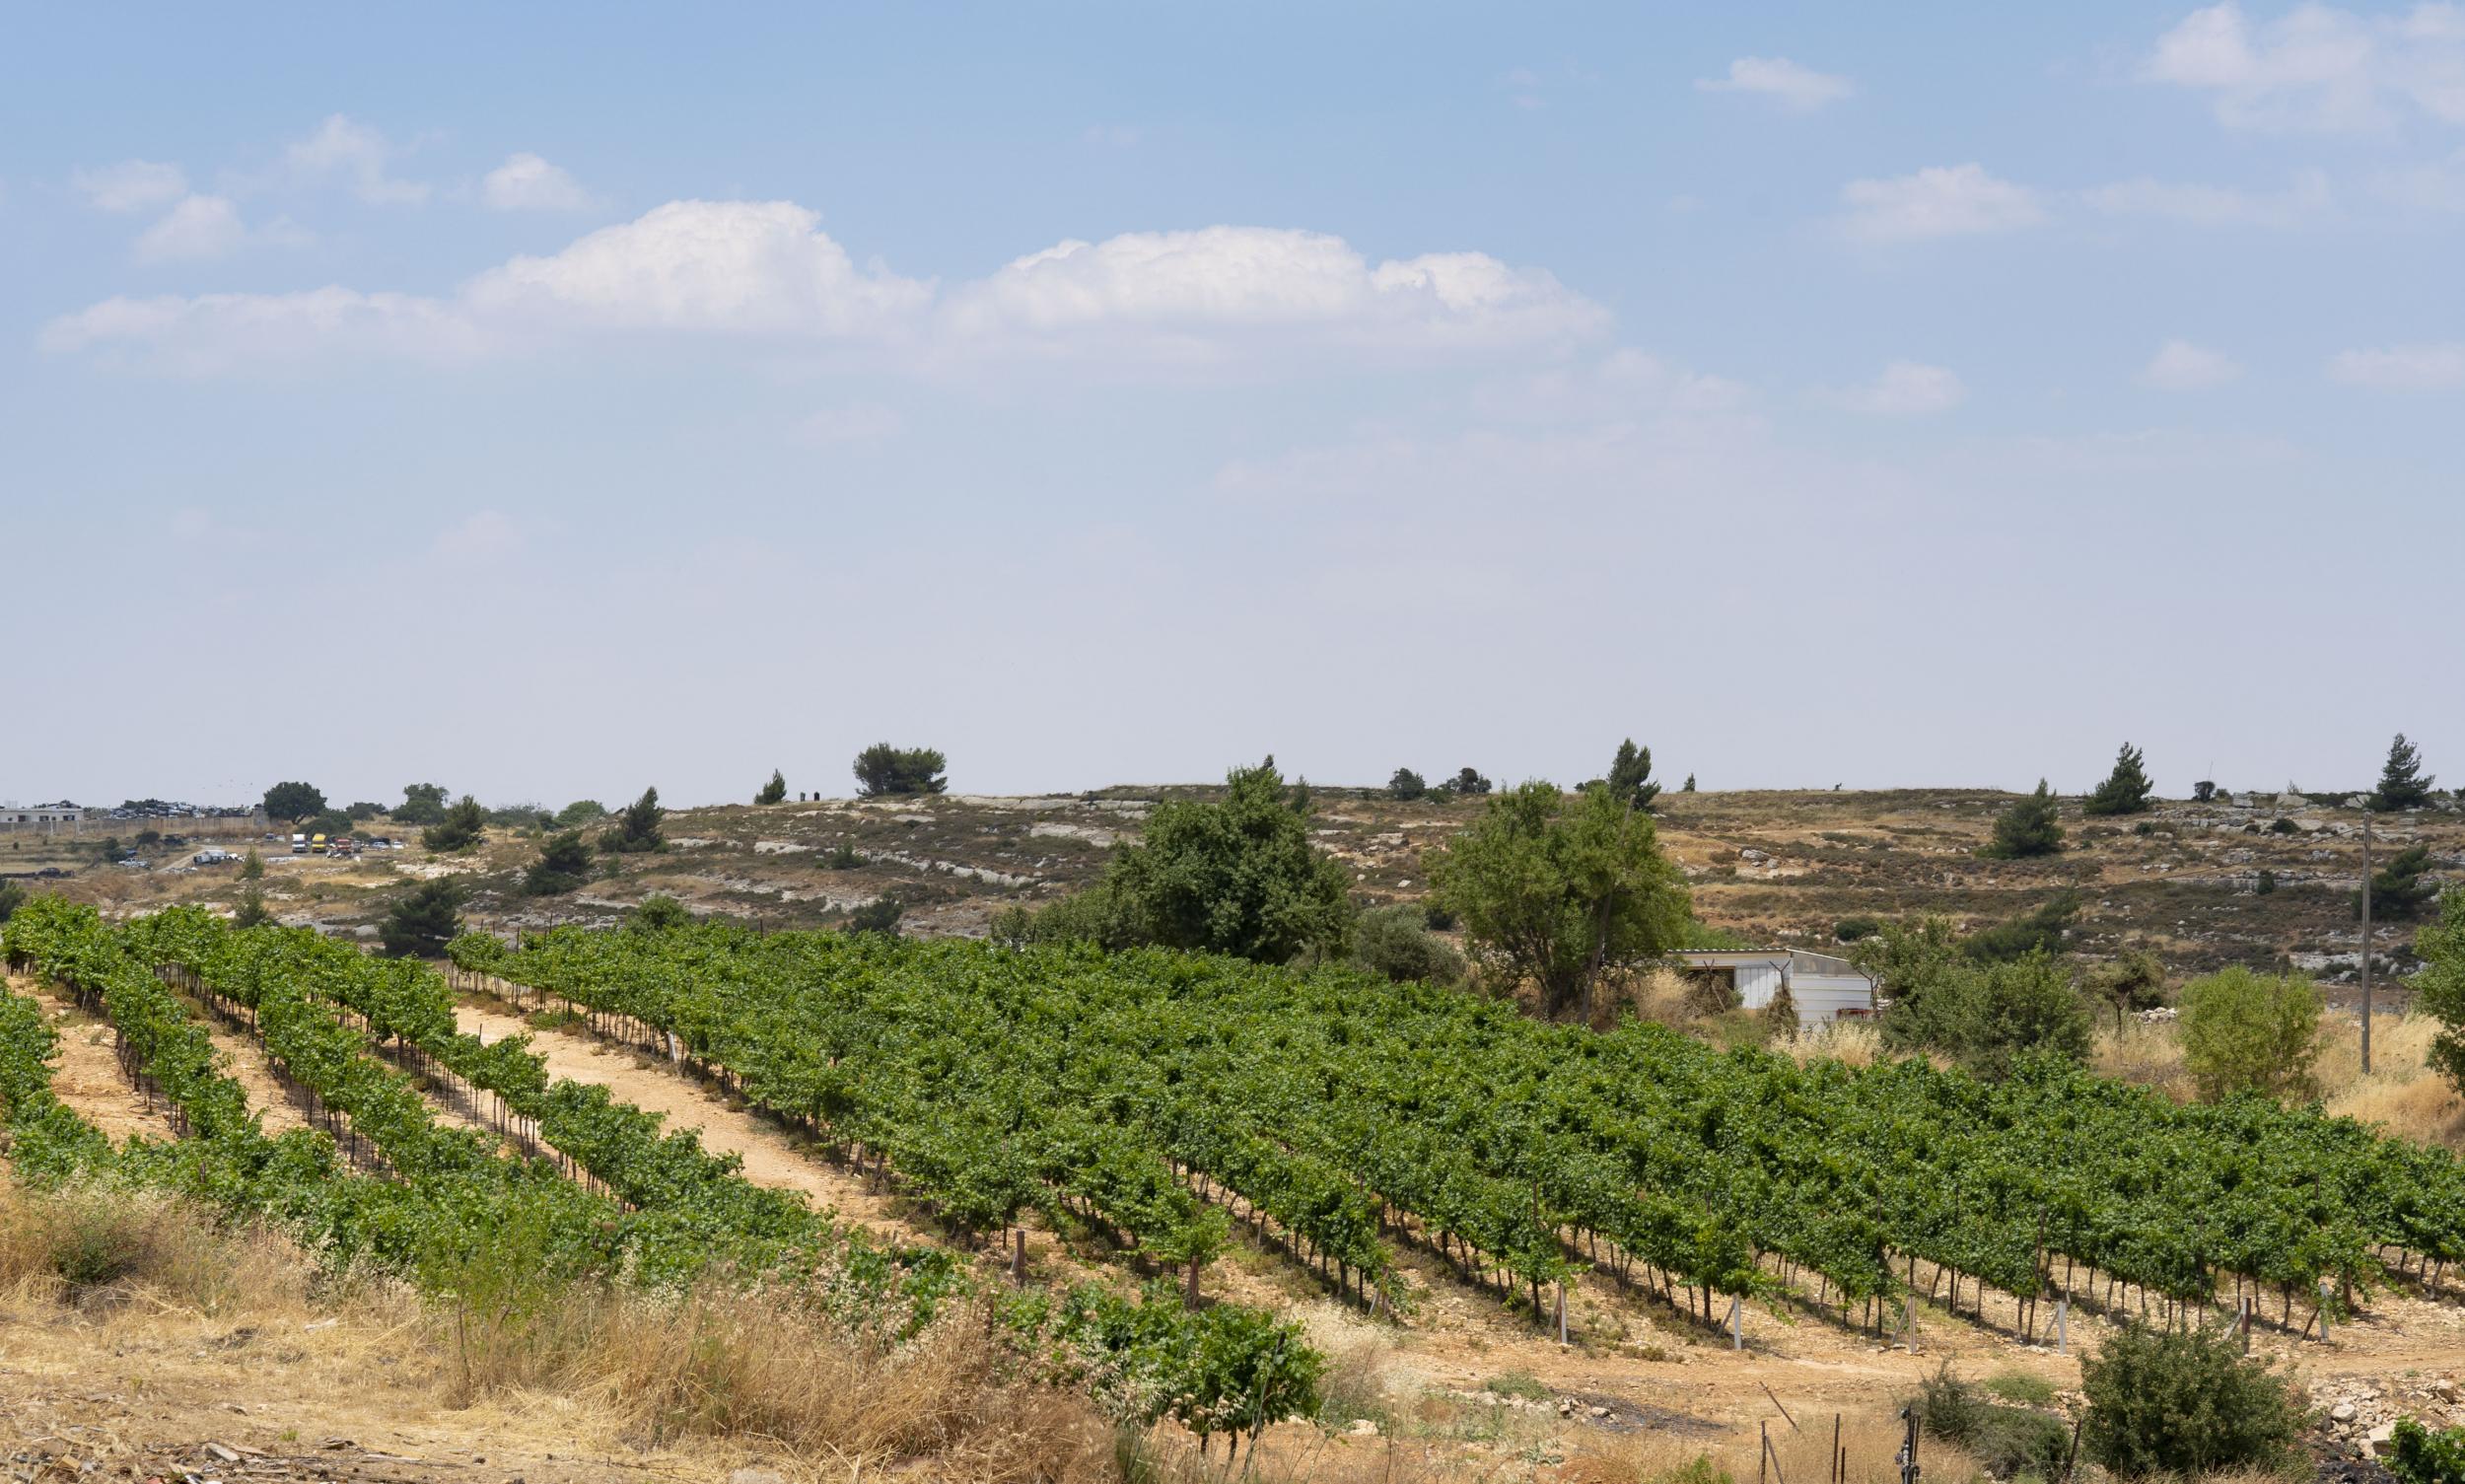 The vineyards of Israeli Psagot winery that belong to the Quran Palestinian family